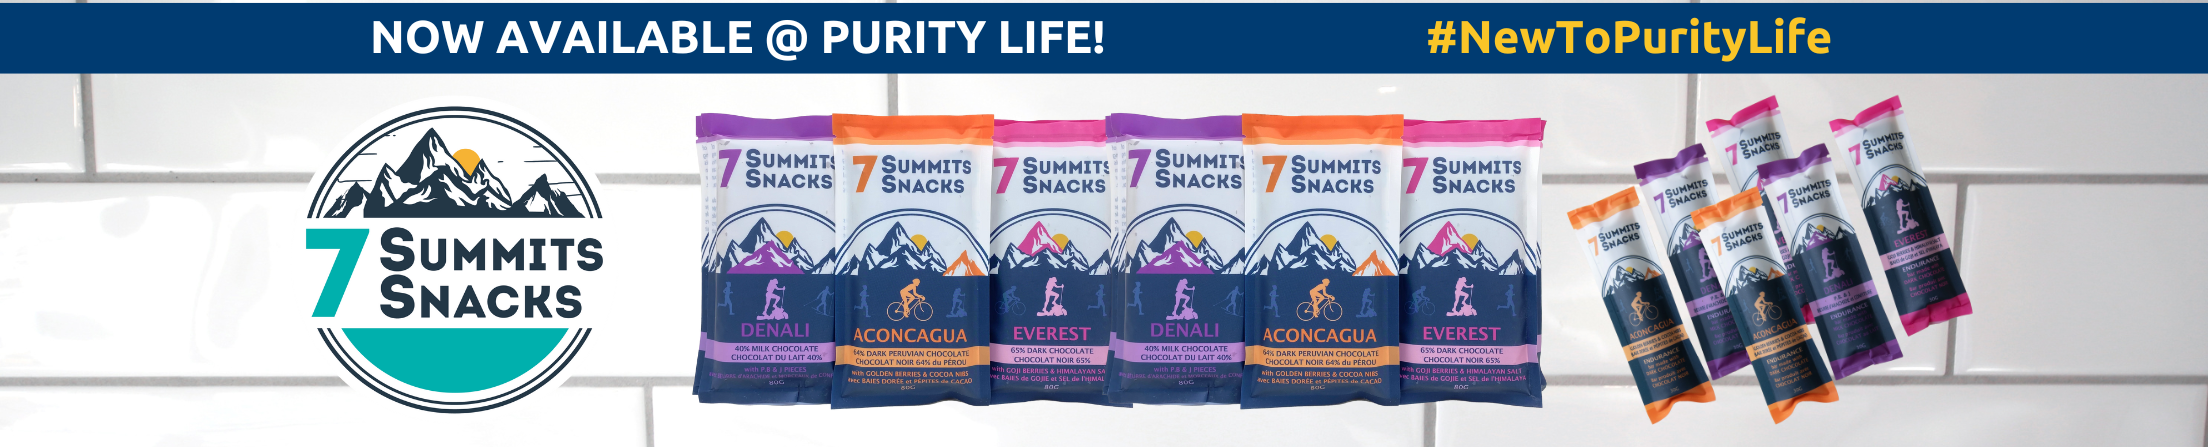 7 Summits Snacks New to Purity Life!